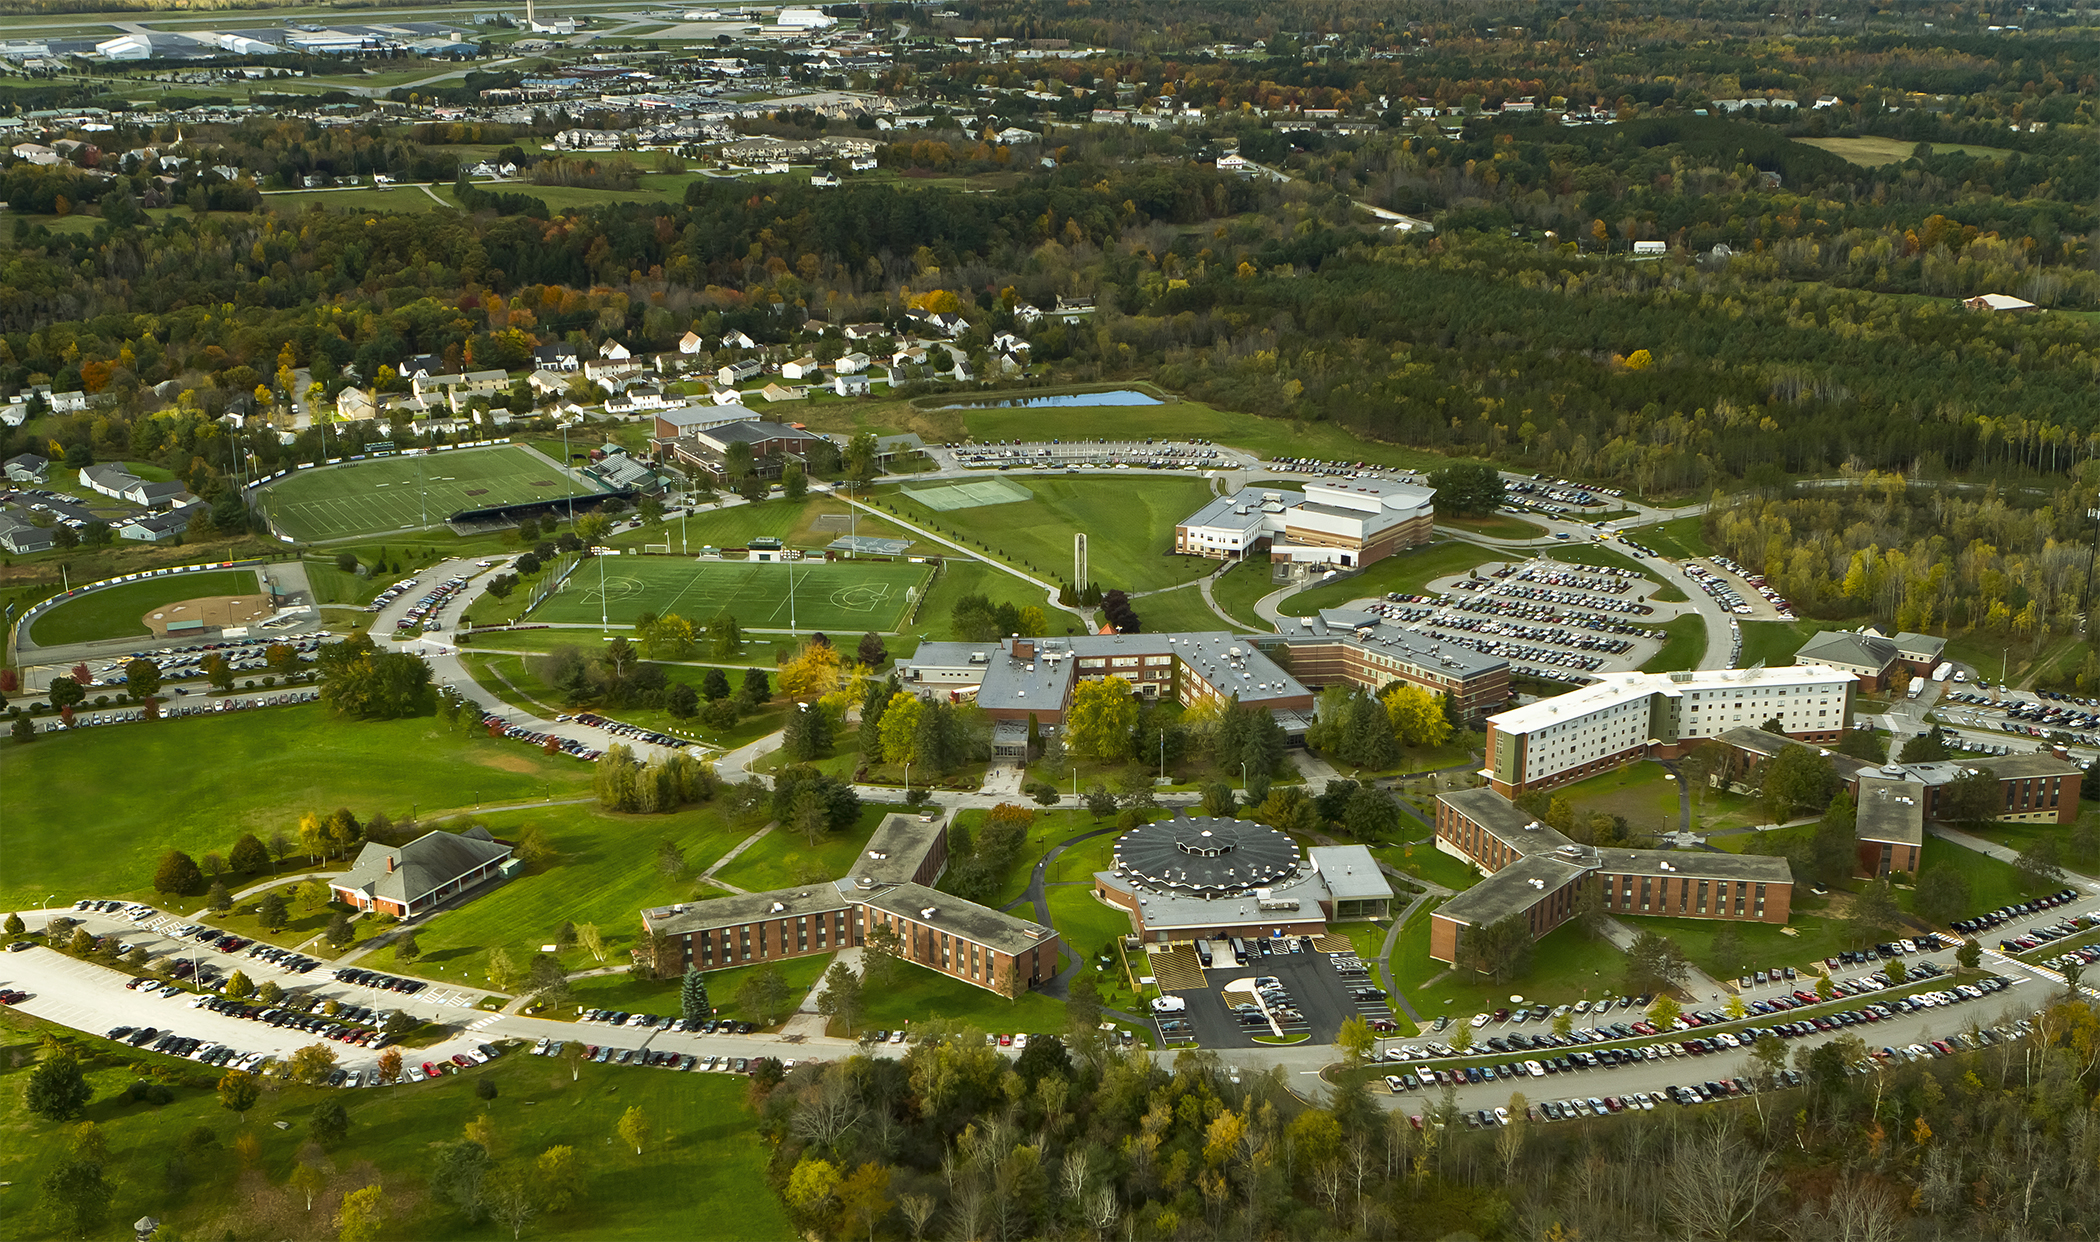 Husson University has a 208-acre campus in beautiful Bangor, Maine.